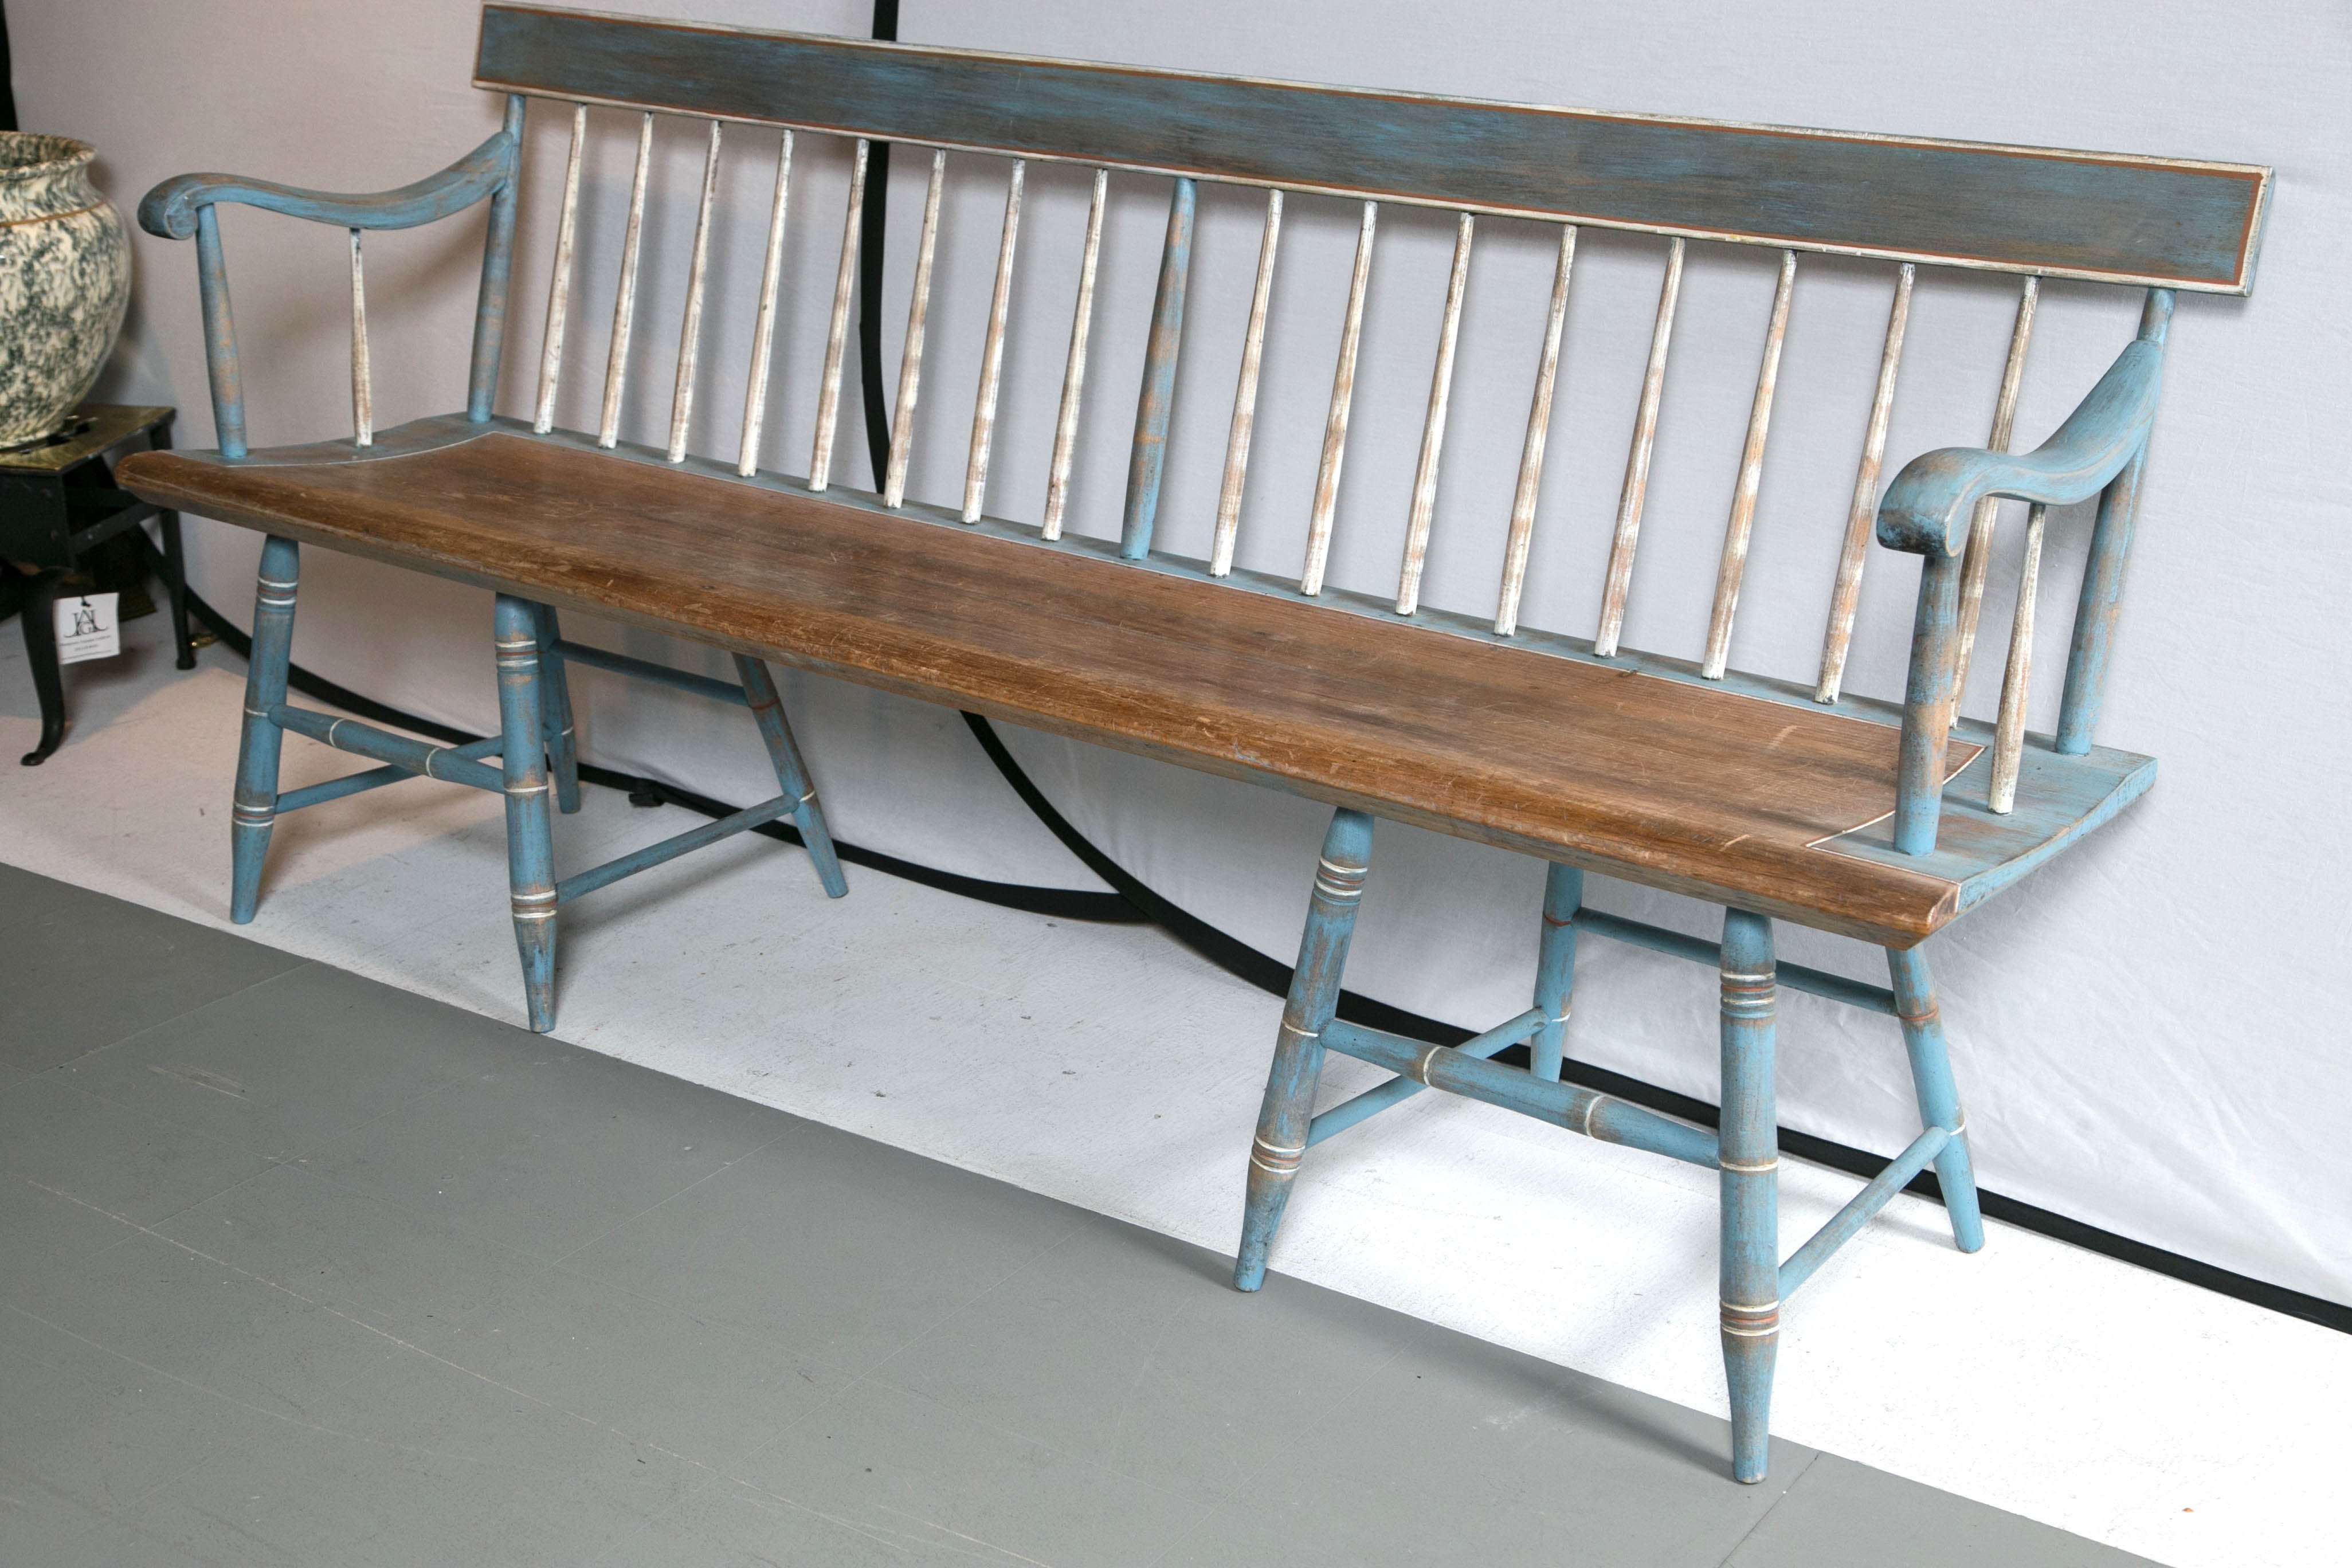 Wonderful early 20th century painted bench great early American style.